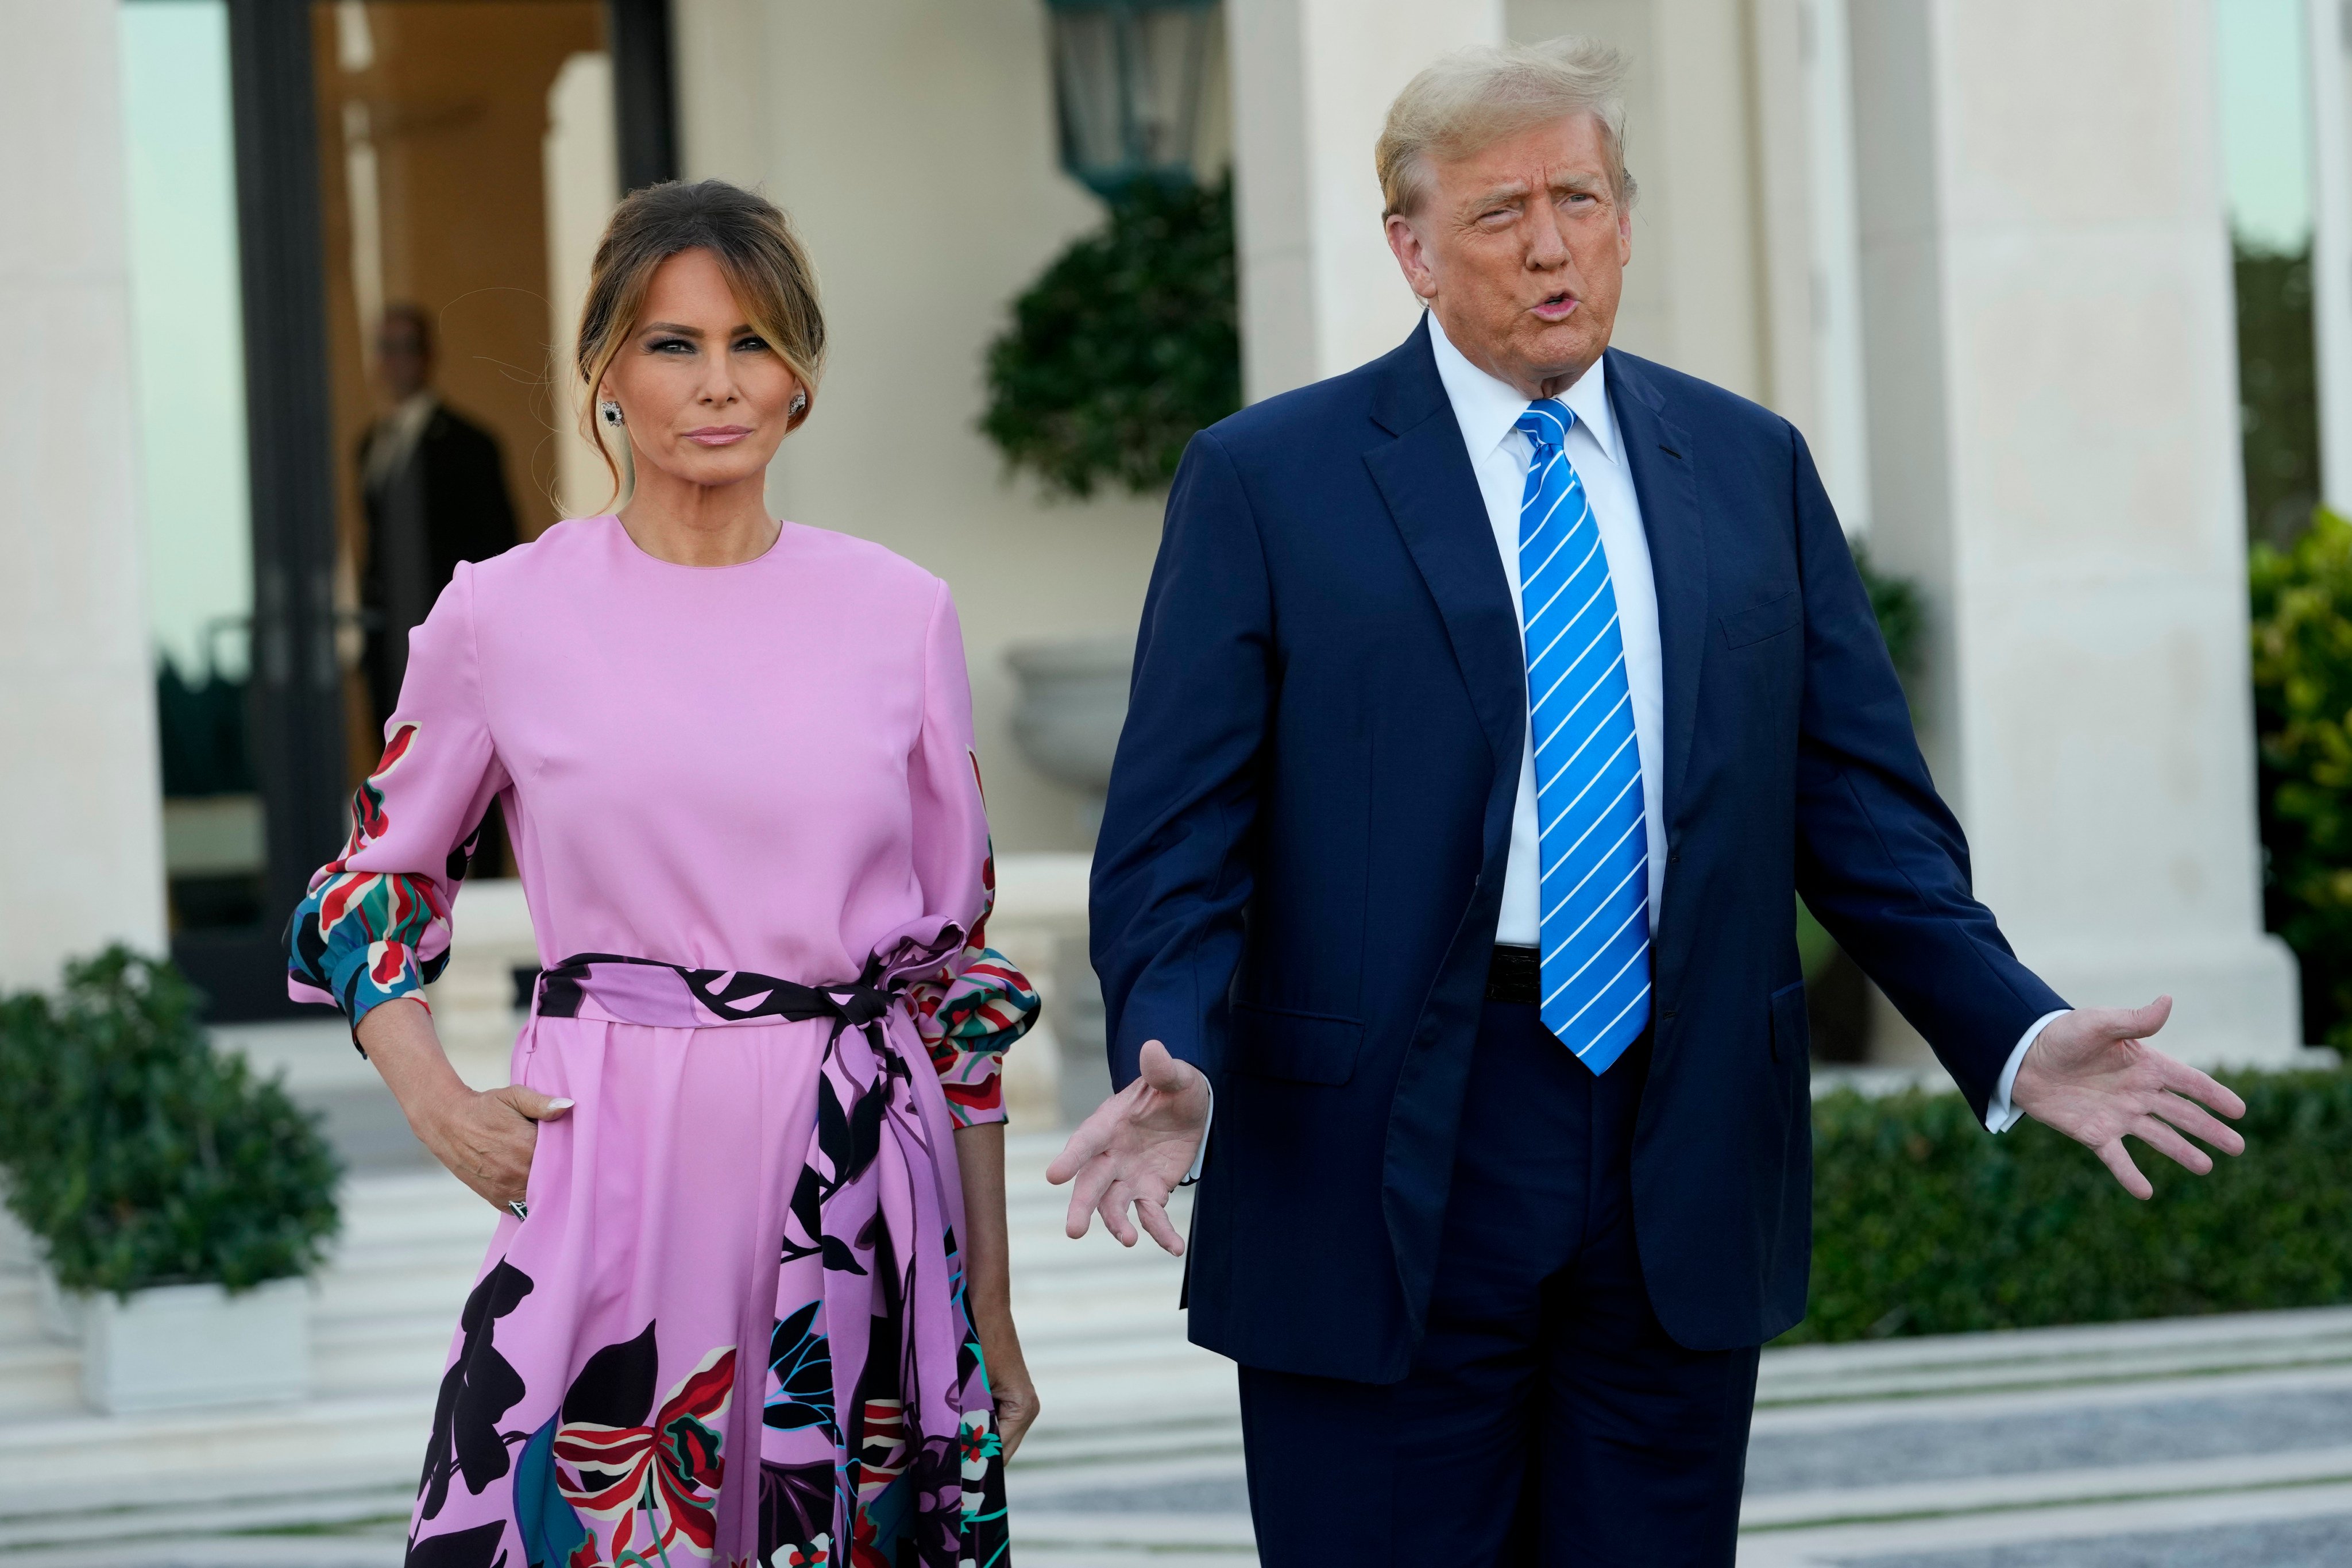 Former US president Donald Trump and wife Melania Trump arrive for a Republican fundraiser in Palm Springs, Florida, on April 6. Photo: AP